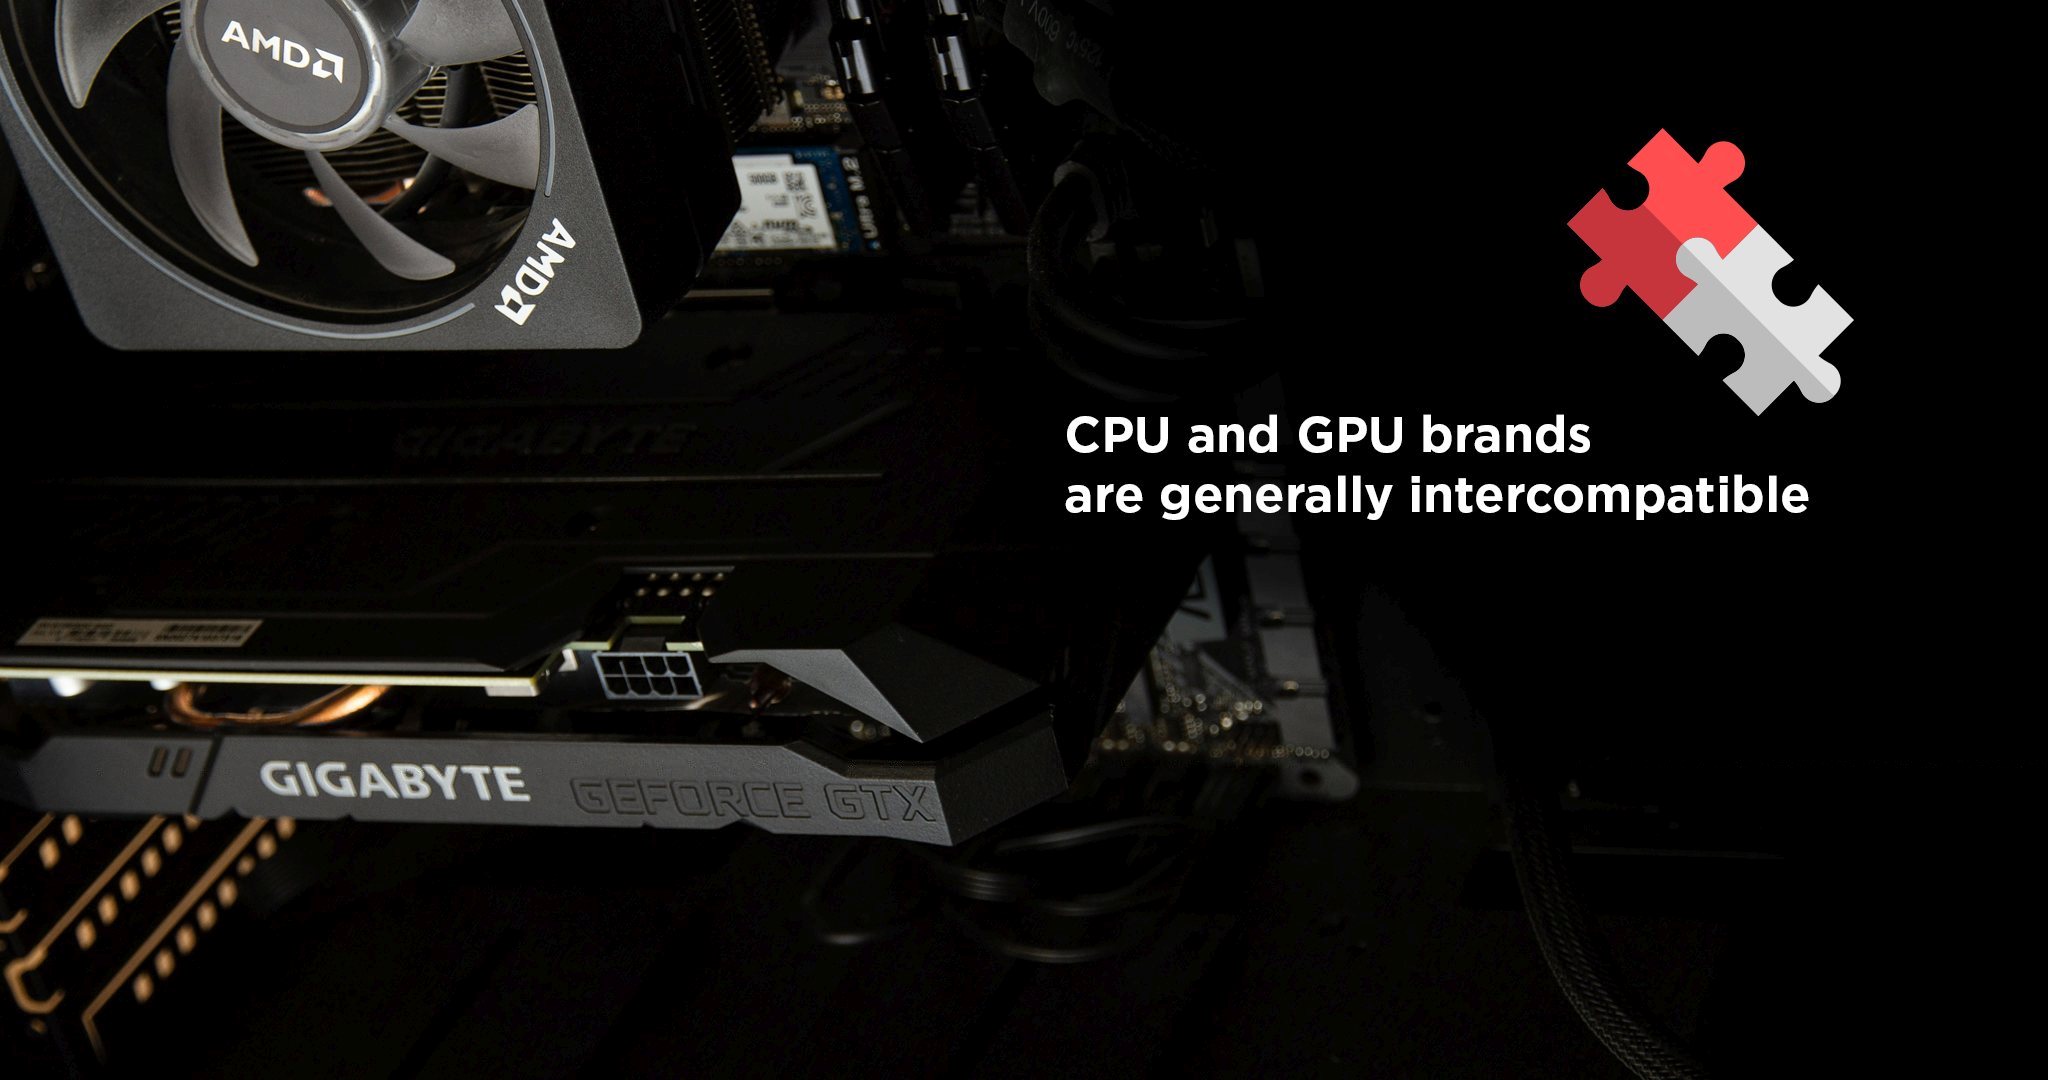 Are Nvidia GPUs compatible with AMD CPUs